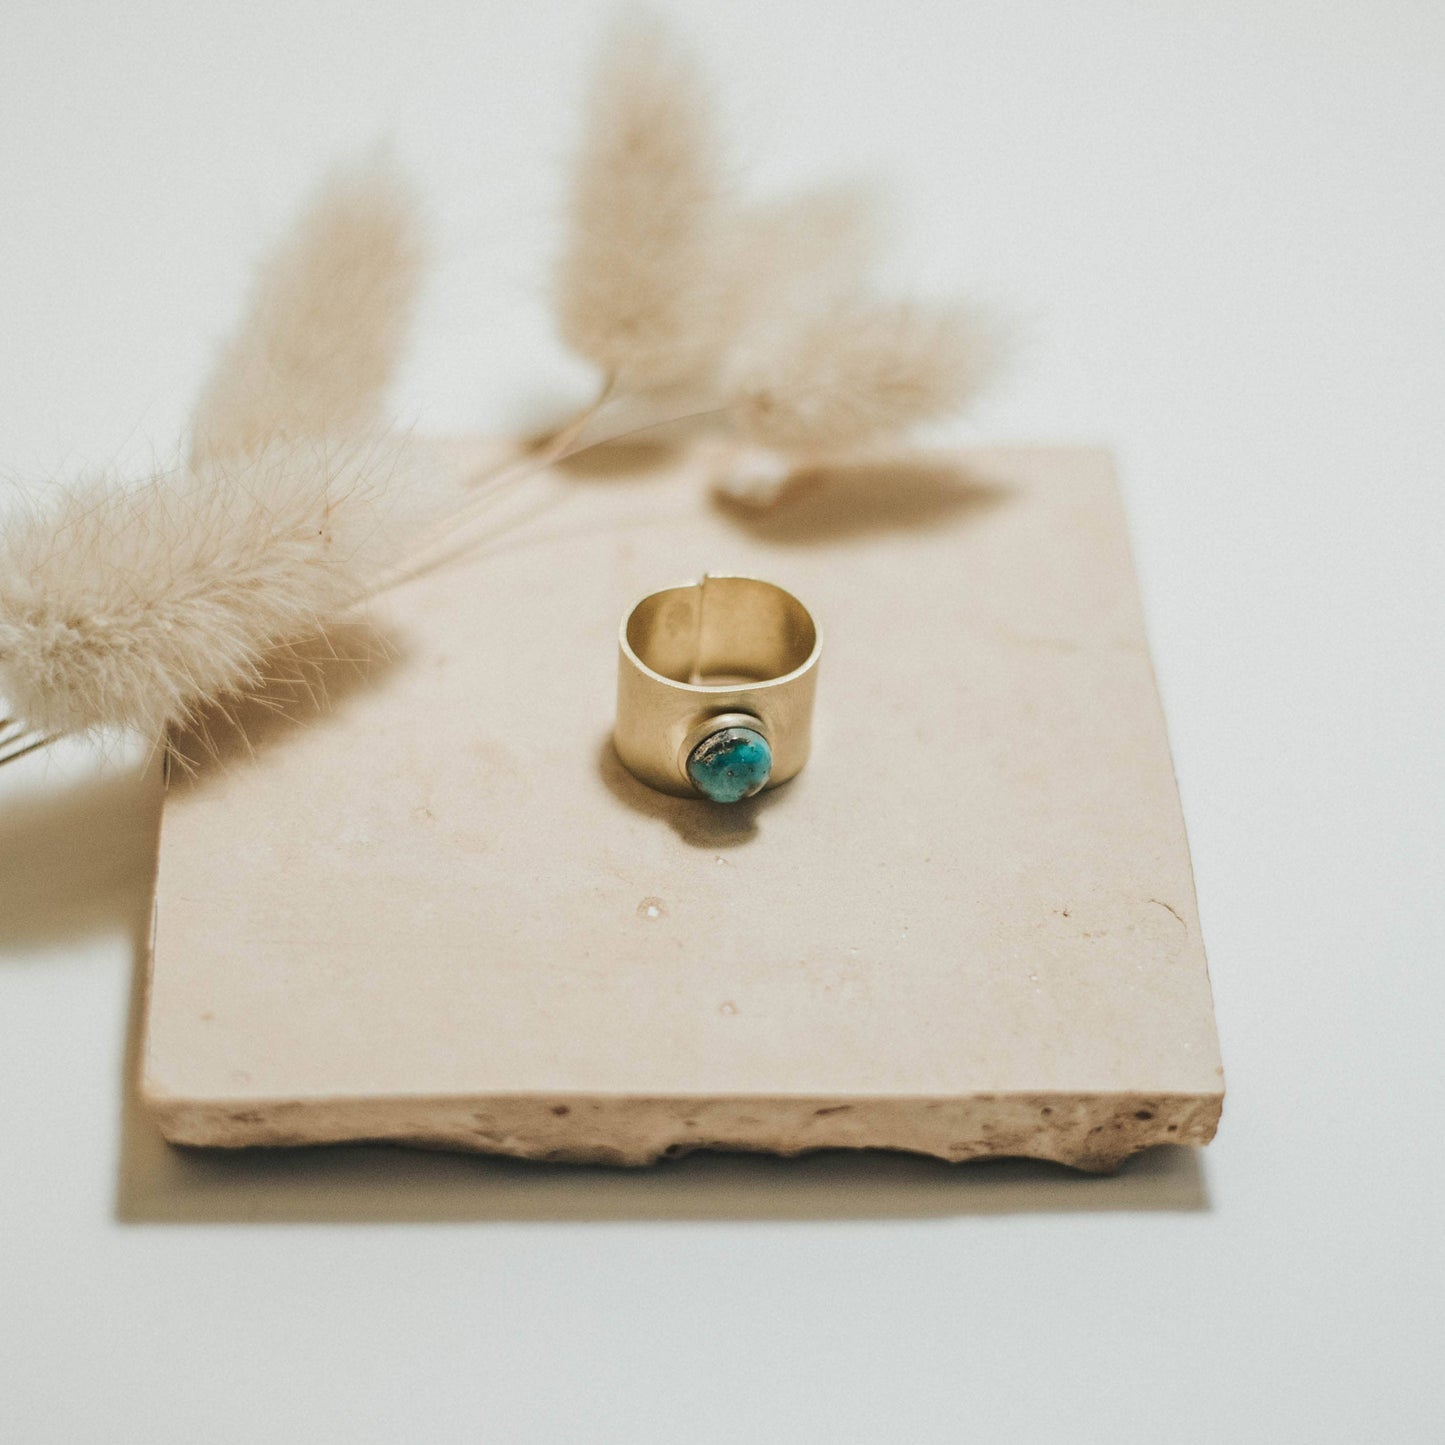 Nile Adjustable Solid Brass Single Stone Ring with Turquoise by Commonform